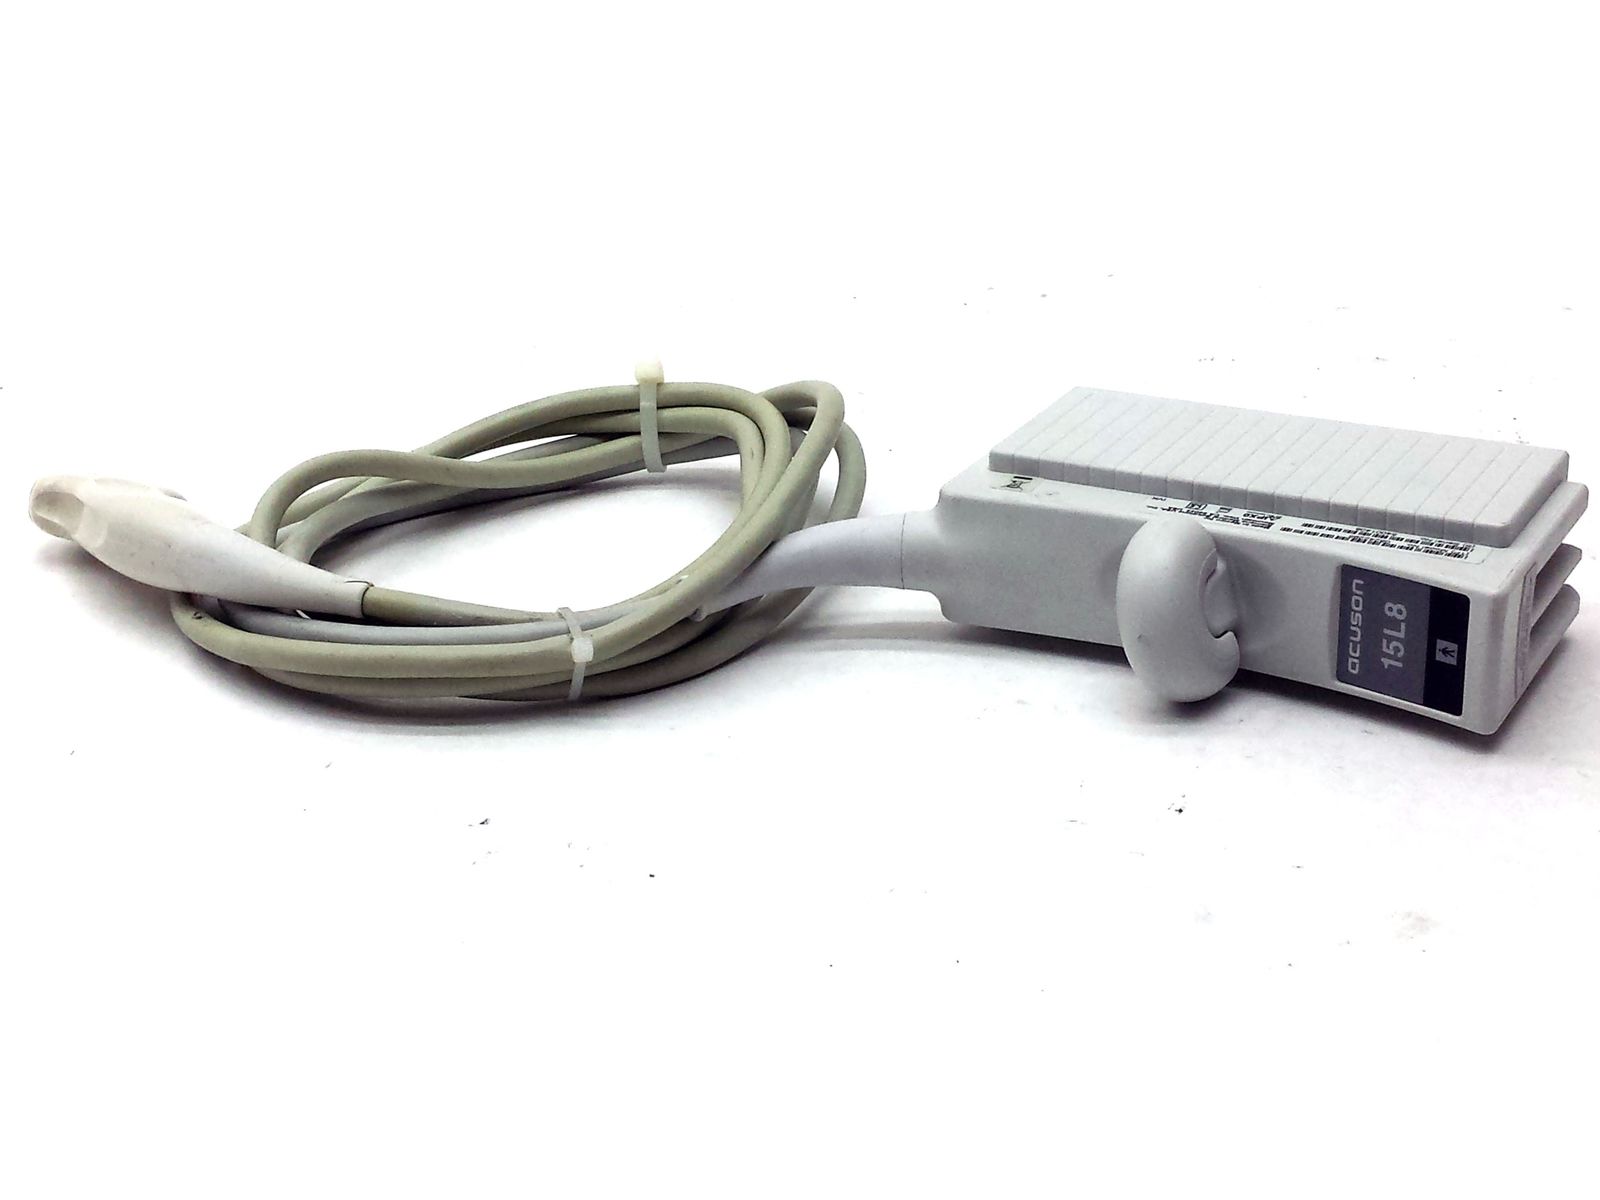 SIEMENS ACUSON SEQUOIA SWIFT LINK MEDICAL TRANSDUCER LINEAR PROBE 15L8 08242295 DIAGNOSTIC ULTRASOUND MACHINES FOR SALE